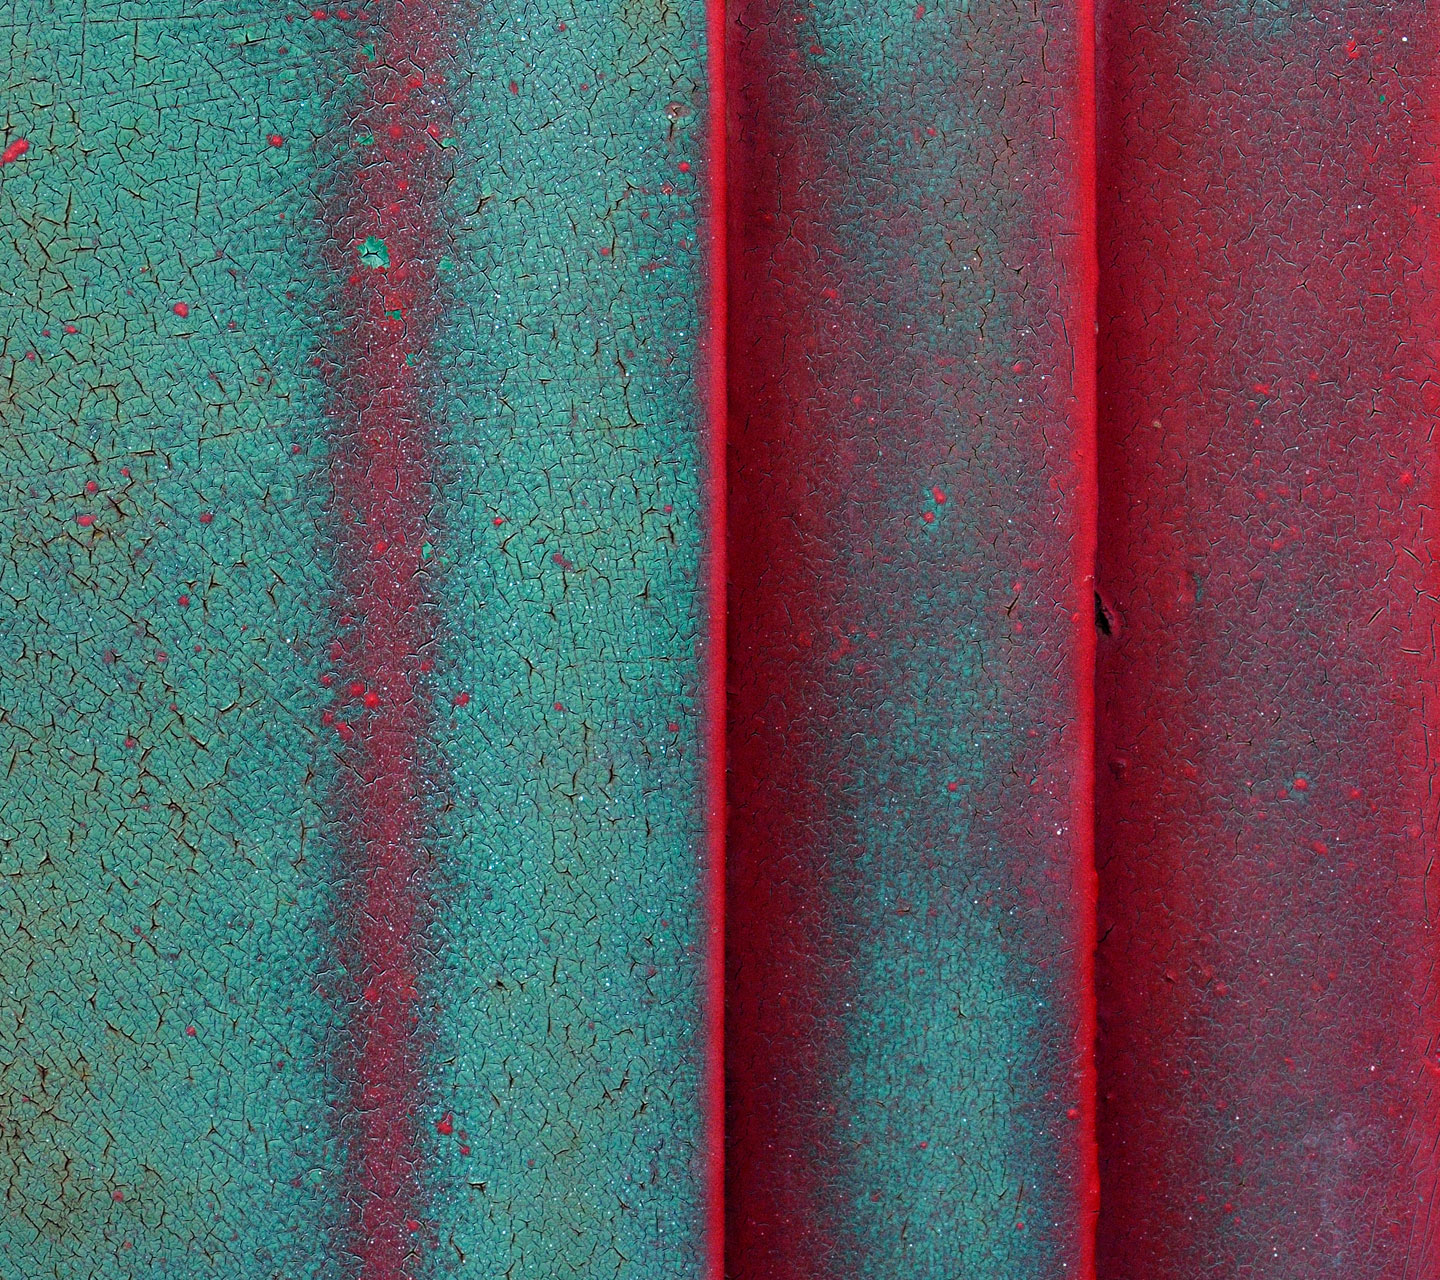 Moto X Stock Wallpaper Android